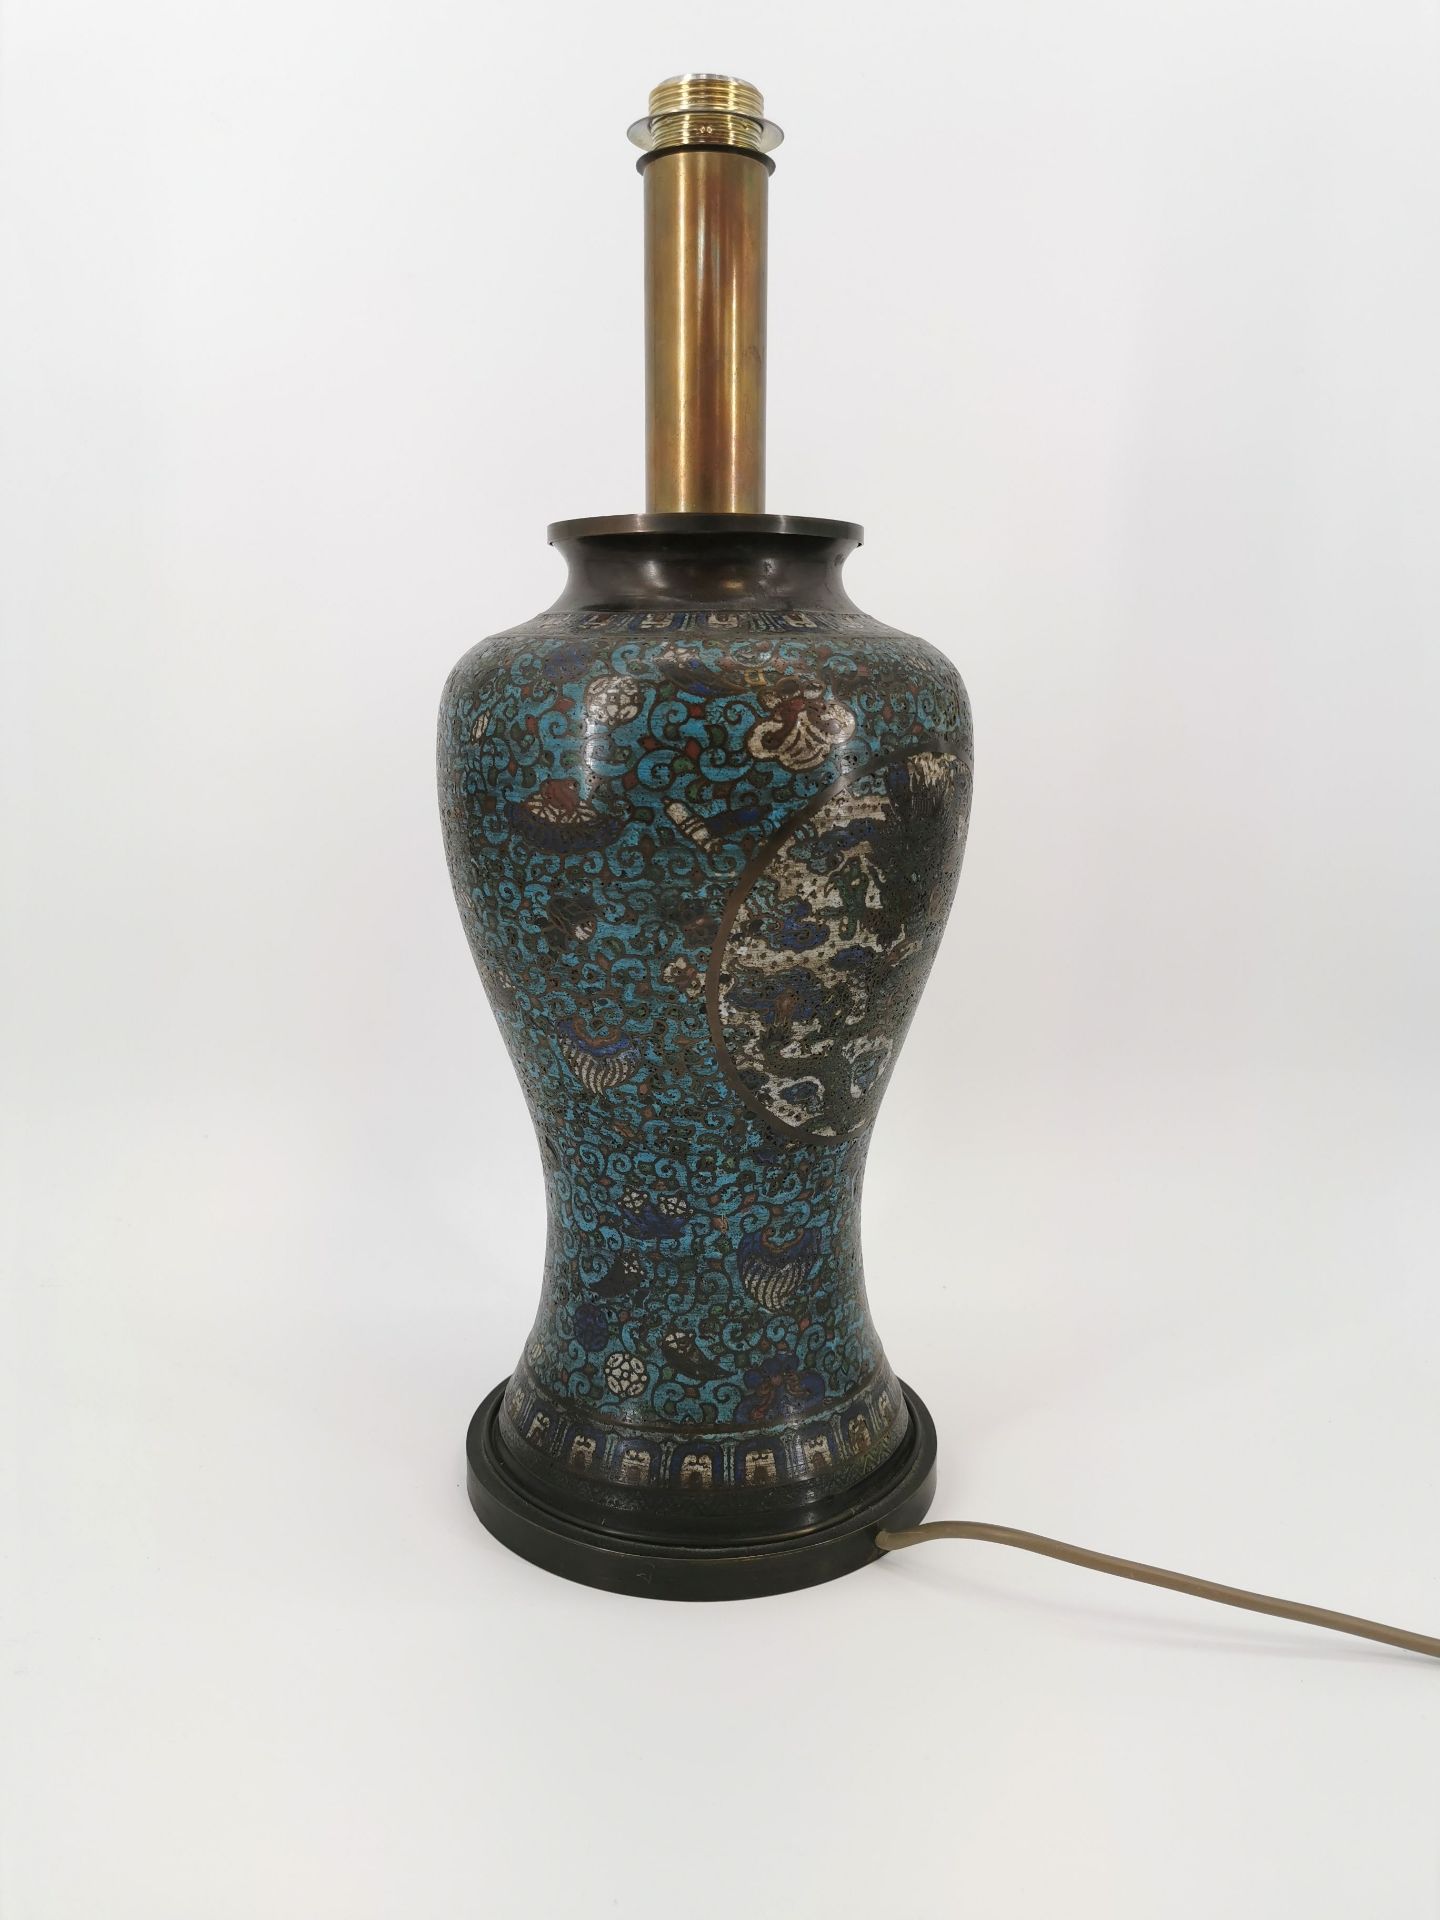 LAMP WITH CLOISONNE SHAFT - Image 4 of 4